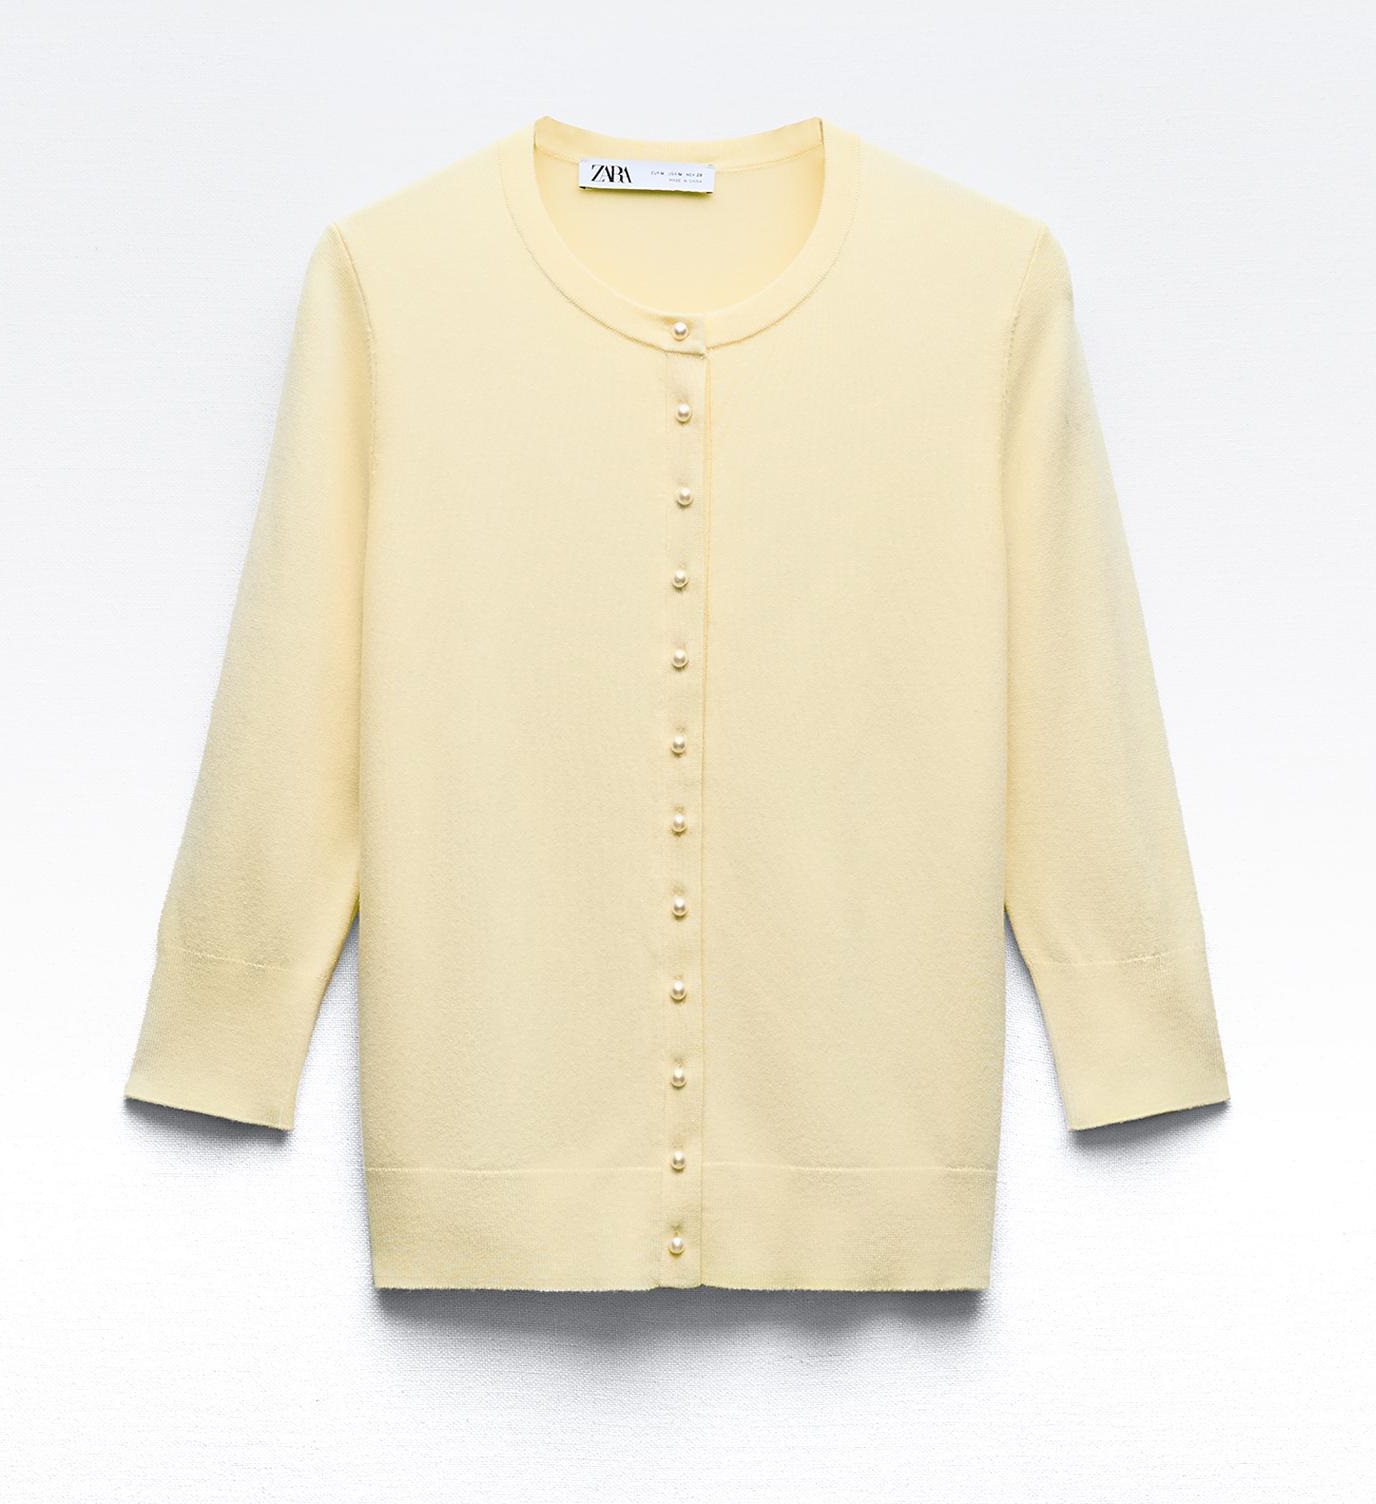 Кардиган Zara Plain Knit With Faux Pearl Buttons, светло-желтый кардиган zara plain knit with faux pearl buttons светло желтый